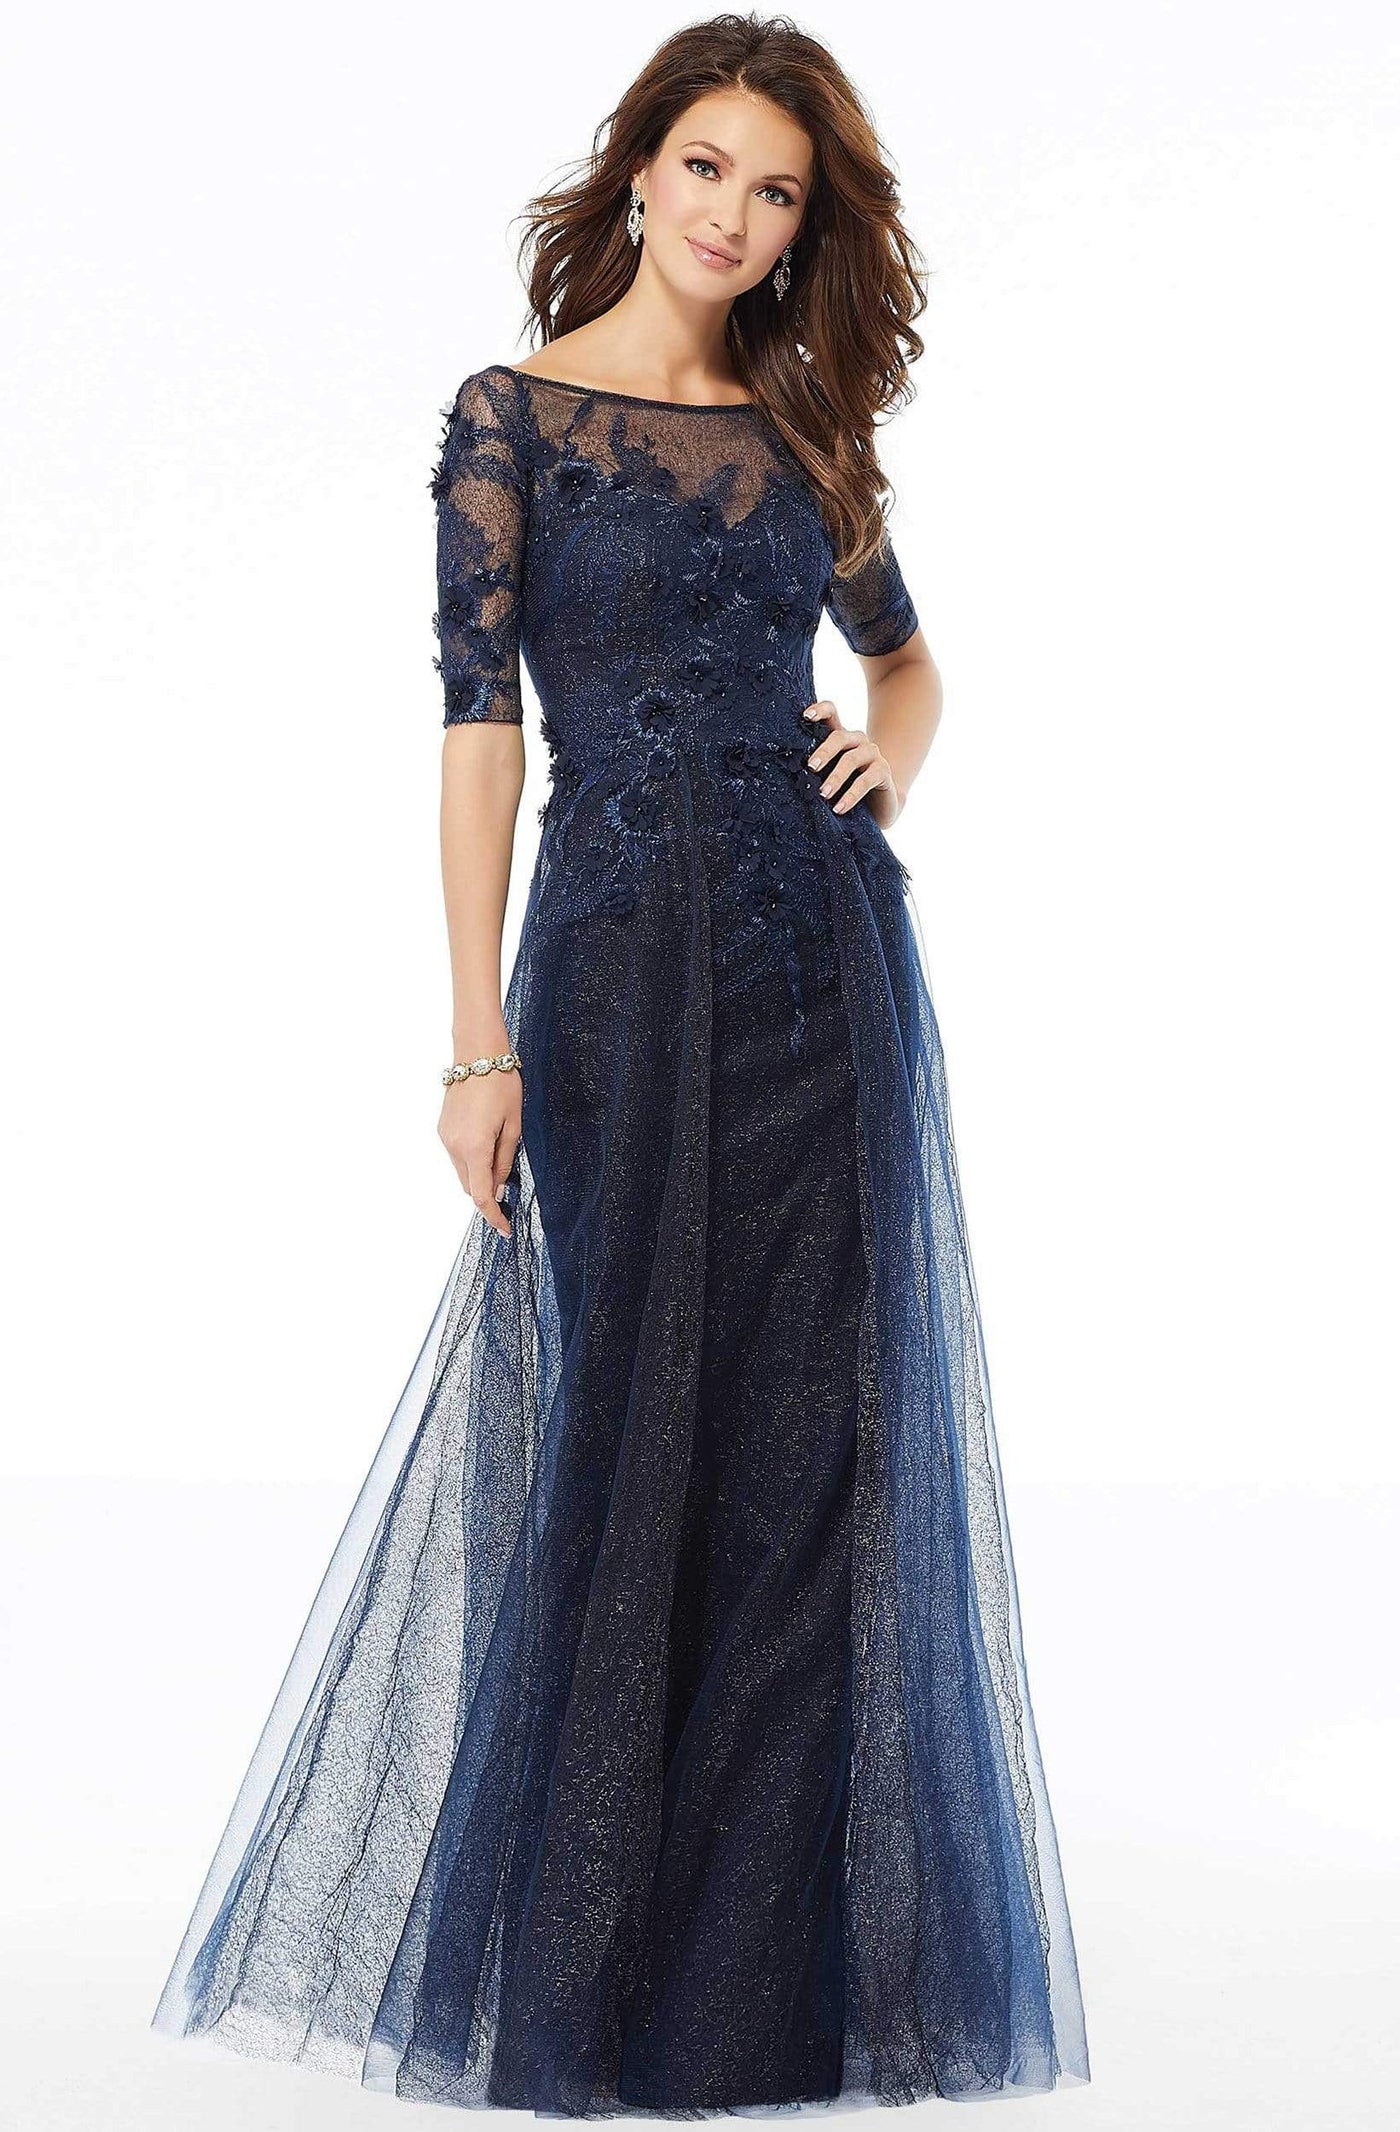 MGNY By Mori Lee - 72121 Floral Embroidered Bateau A-Line Dress Mother of the Bride Dresses 2 / Navy